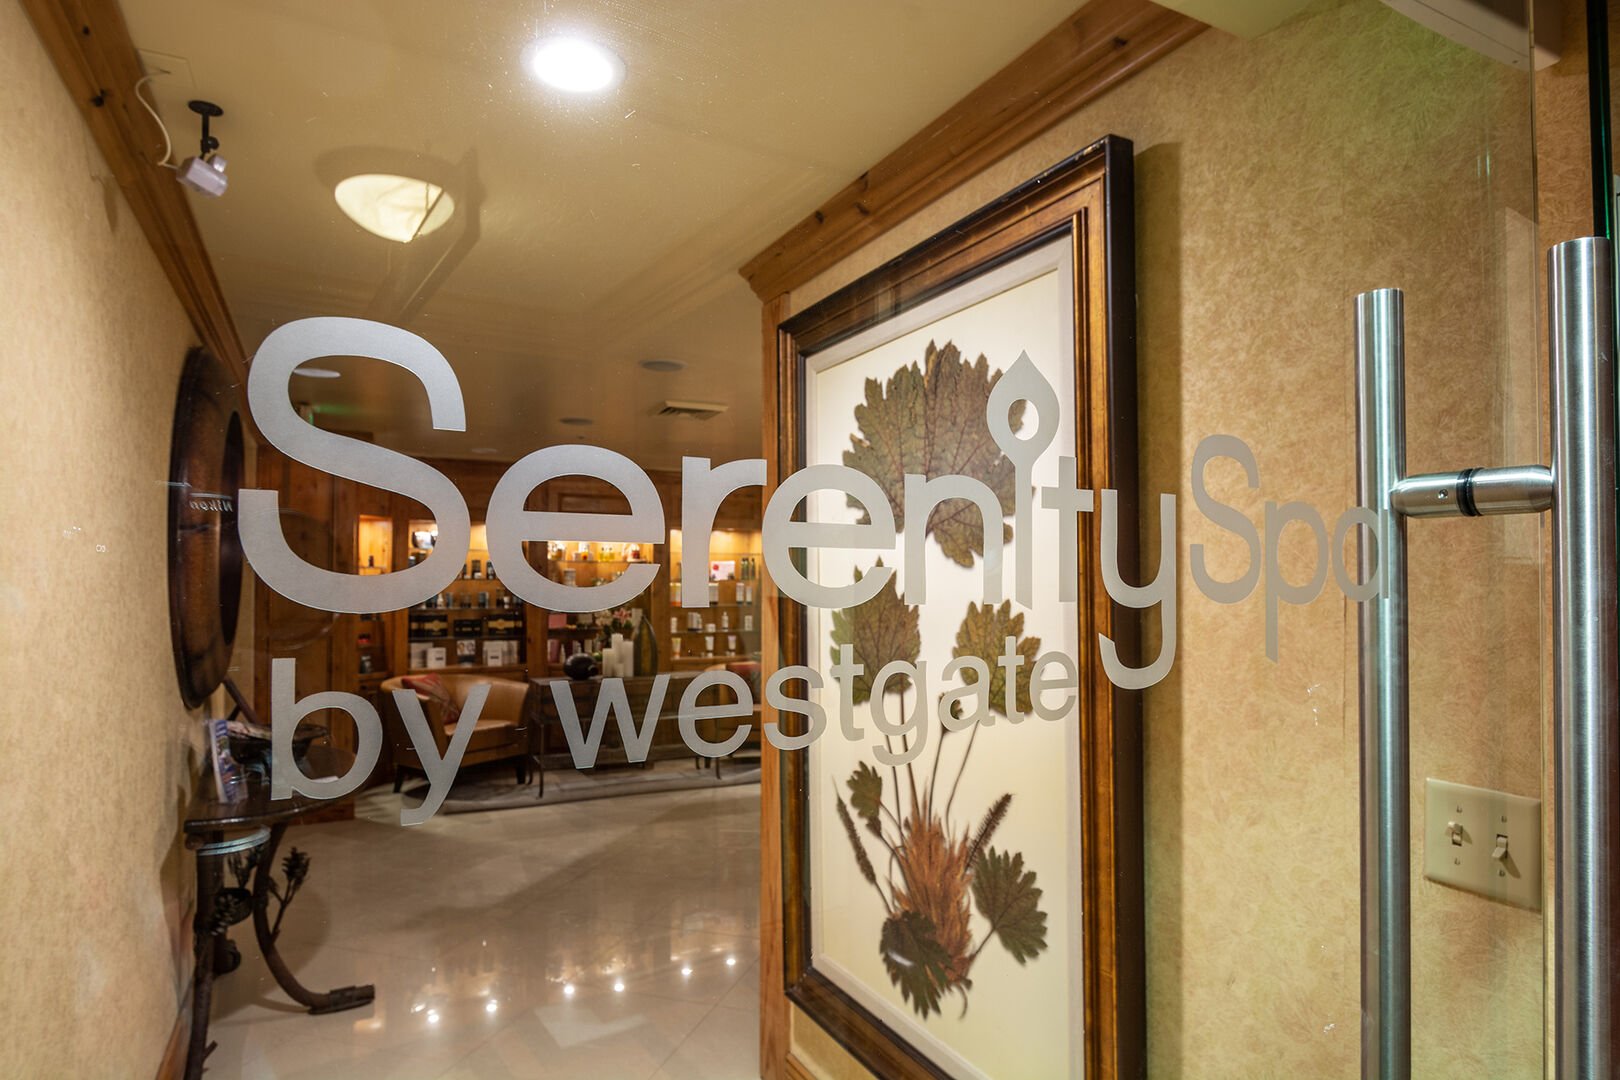 Serenity Spa. Treatments by appointment